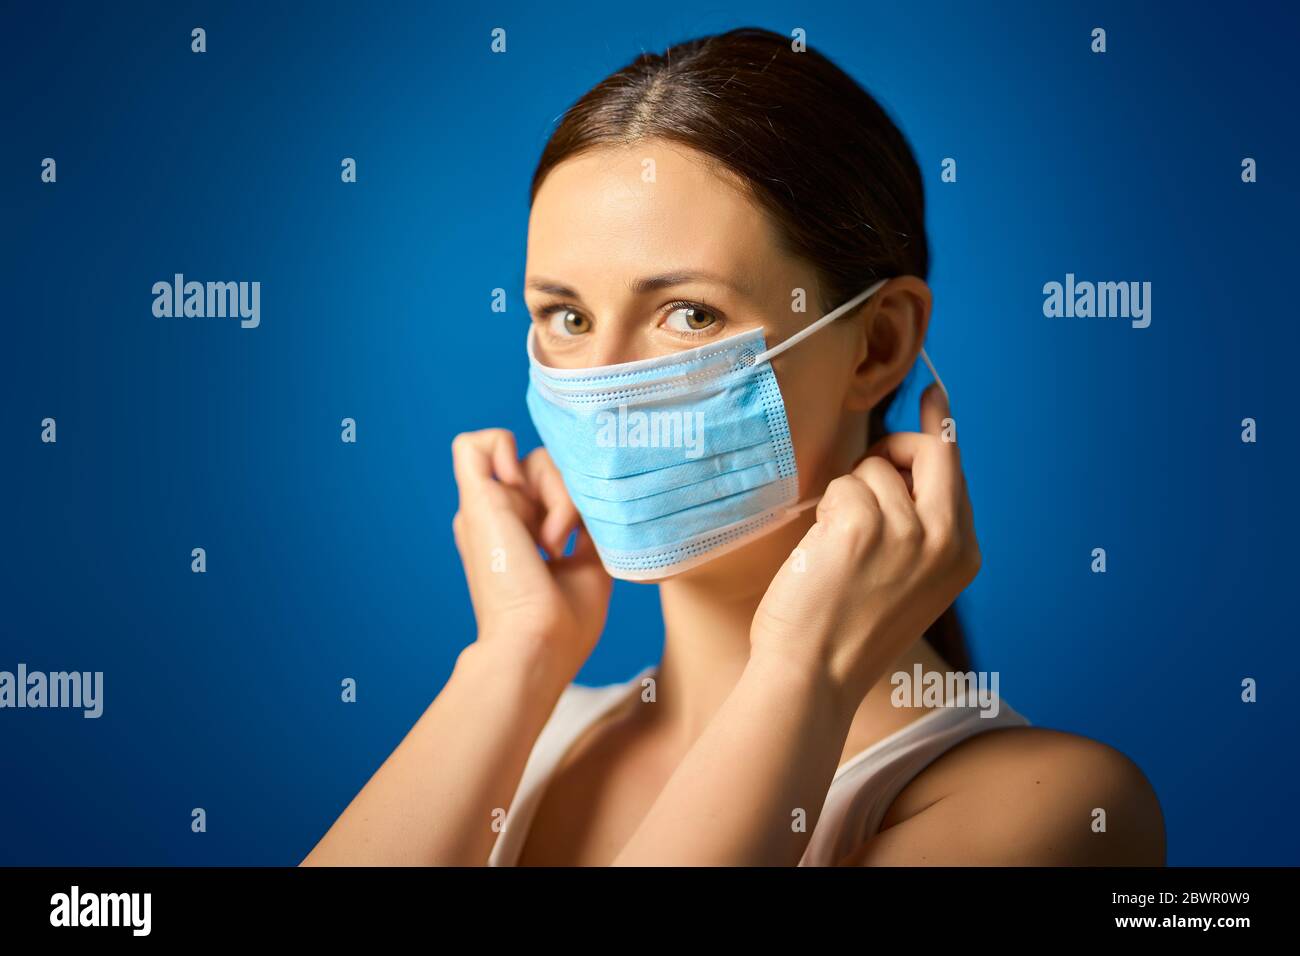 woman in white shirt shows how to wear a mask during a pandemic Stock Photo